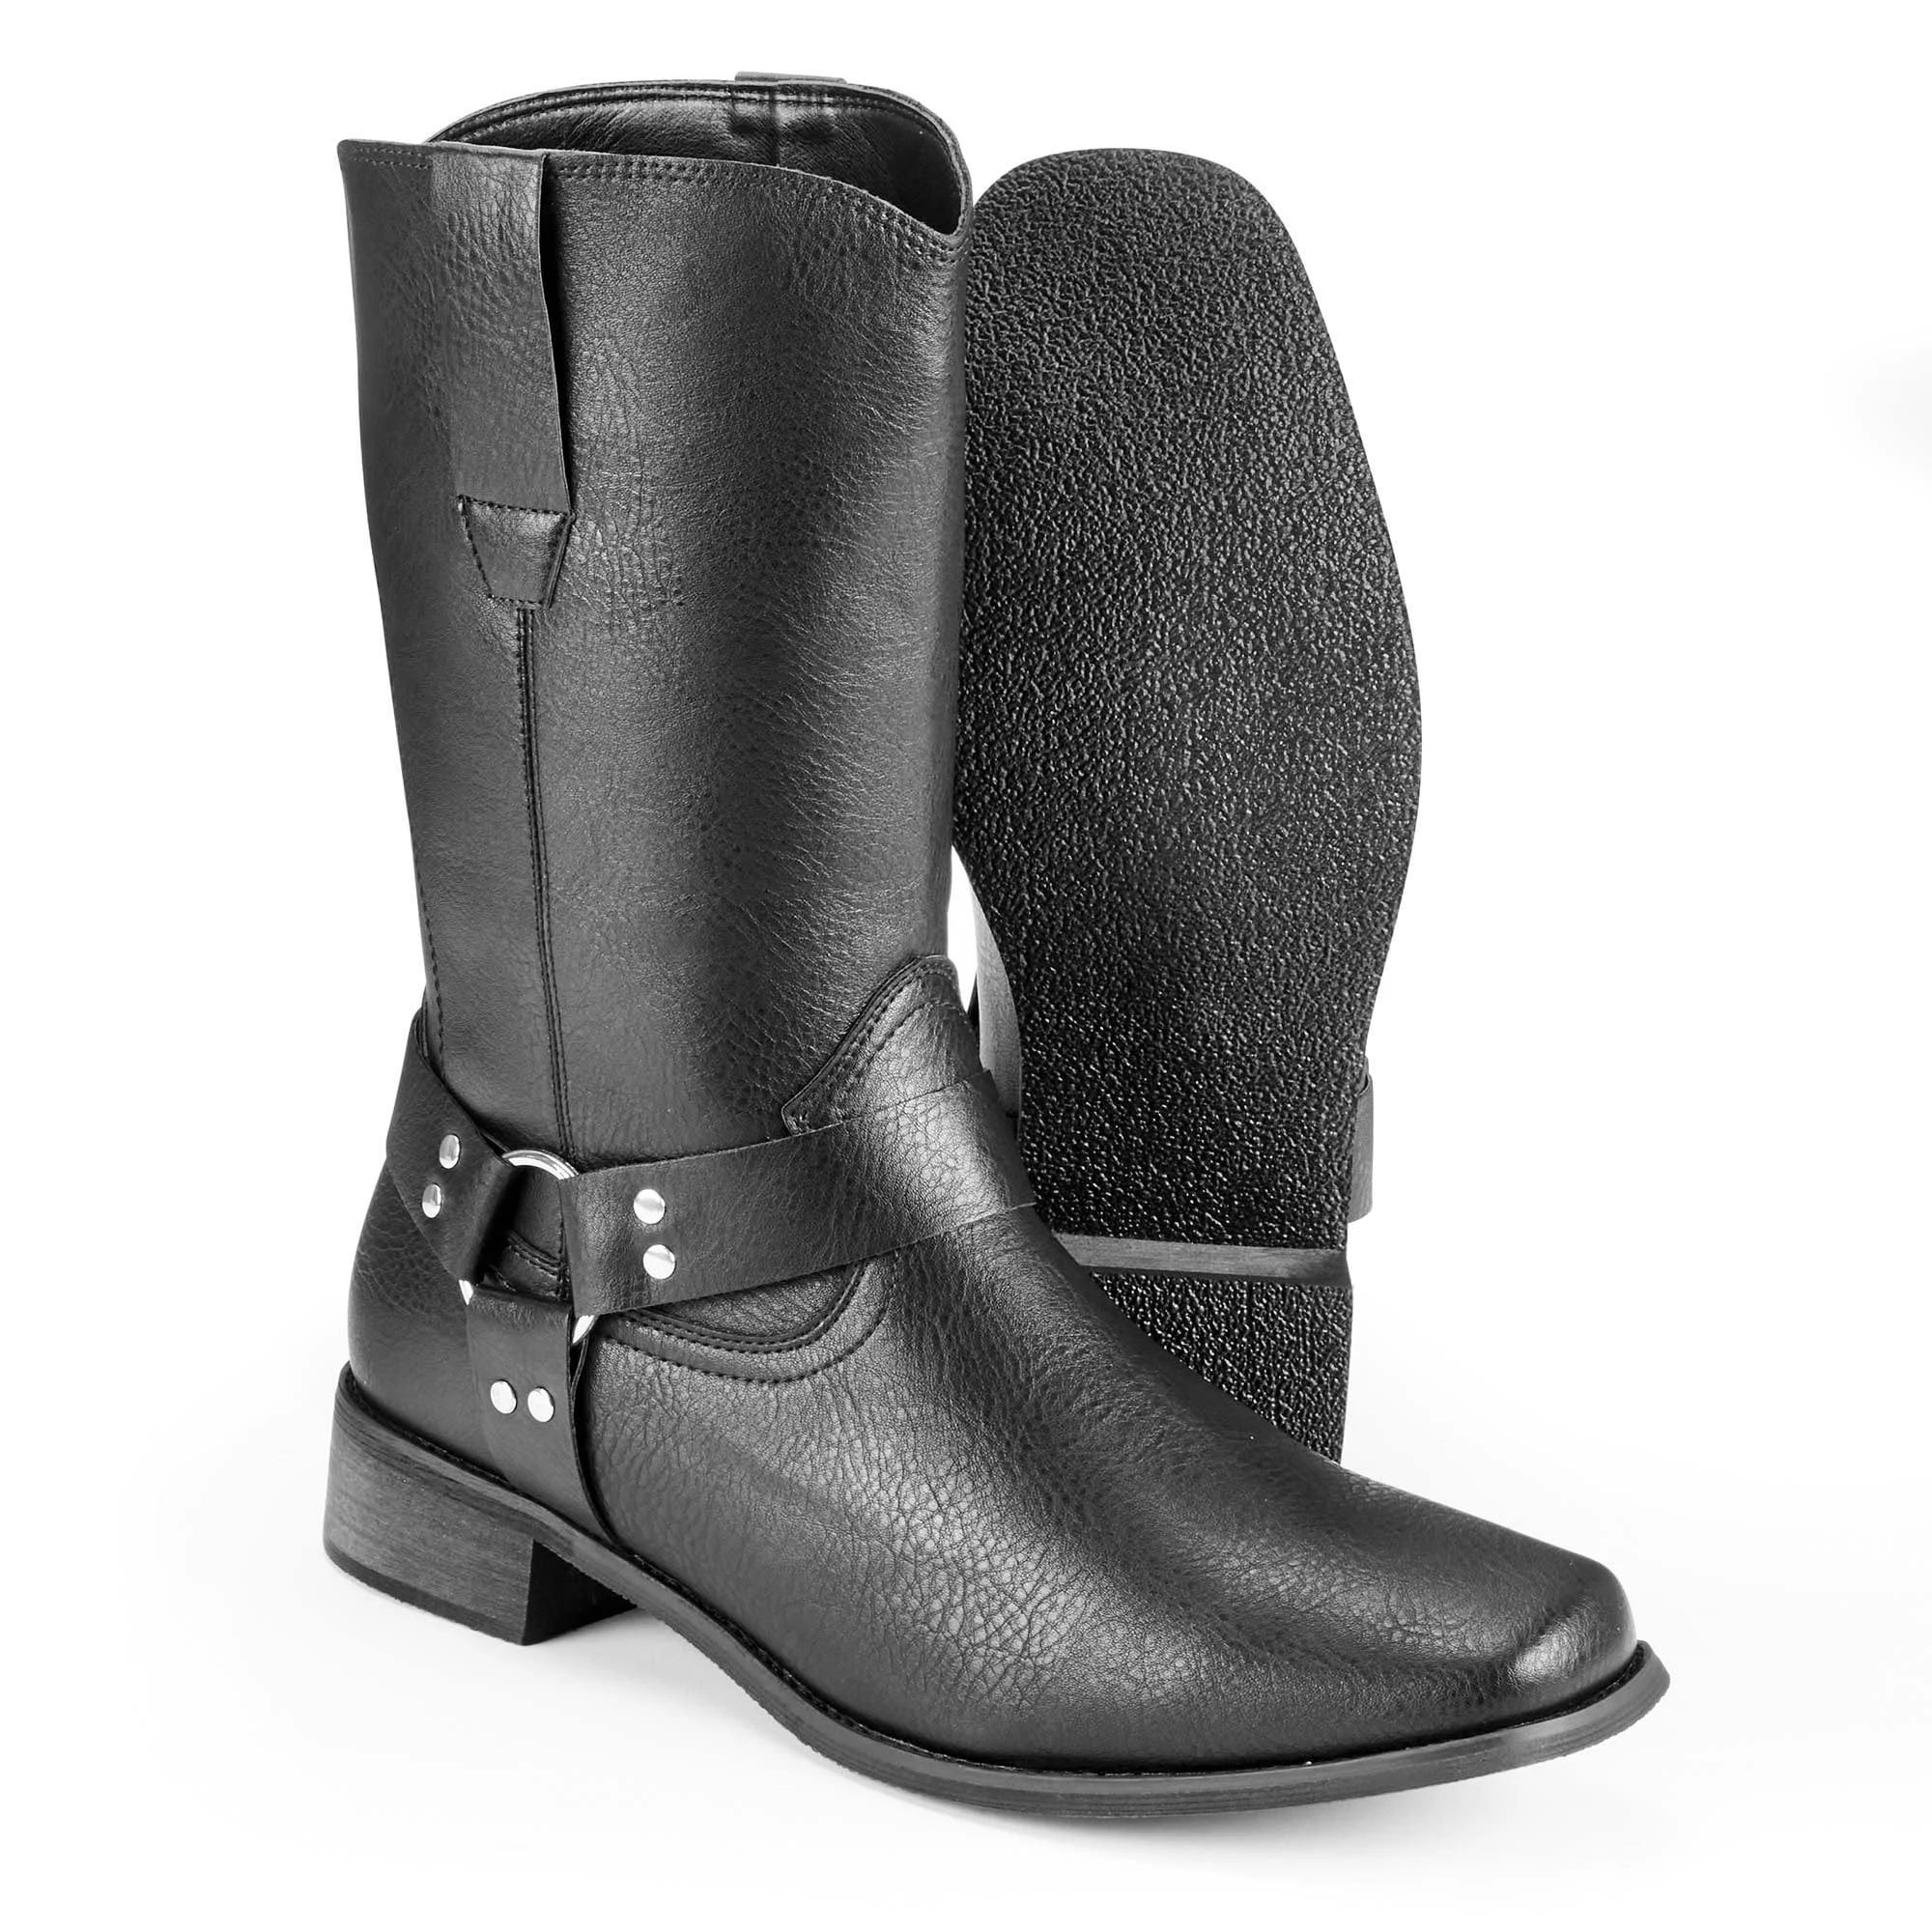 Comfortable and Stylish Black Cowboy Boots with Buckle for Western or Motorcycle Look | Image